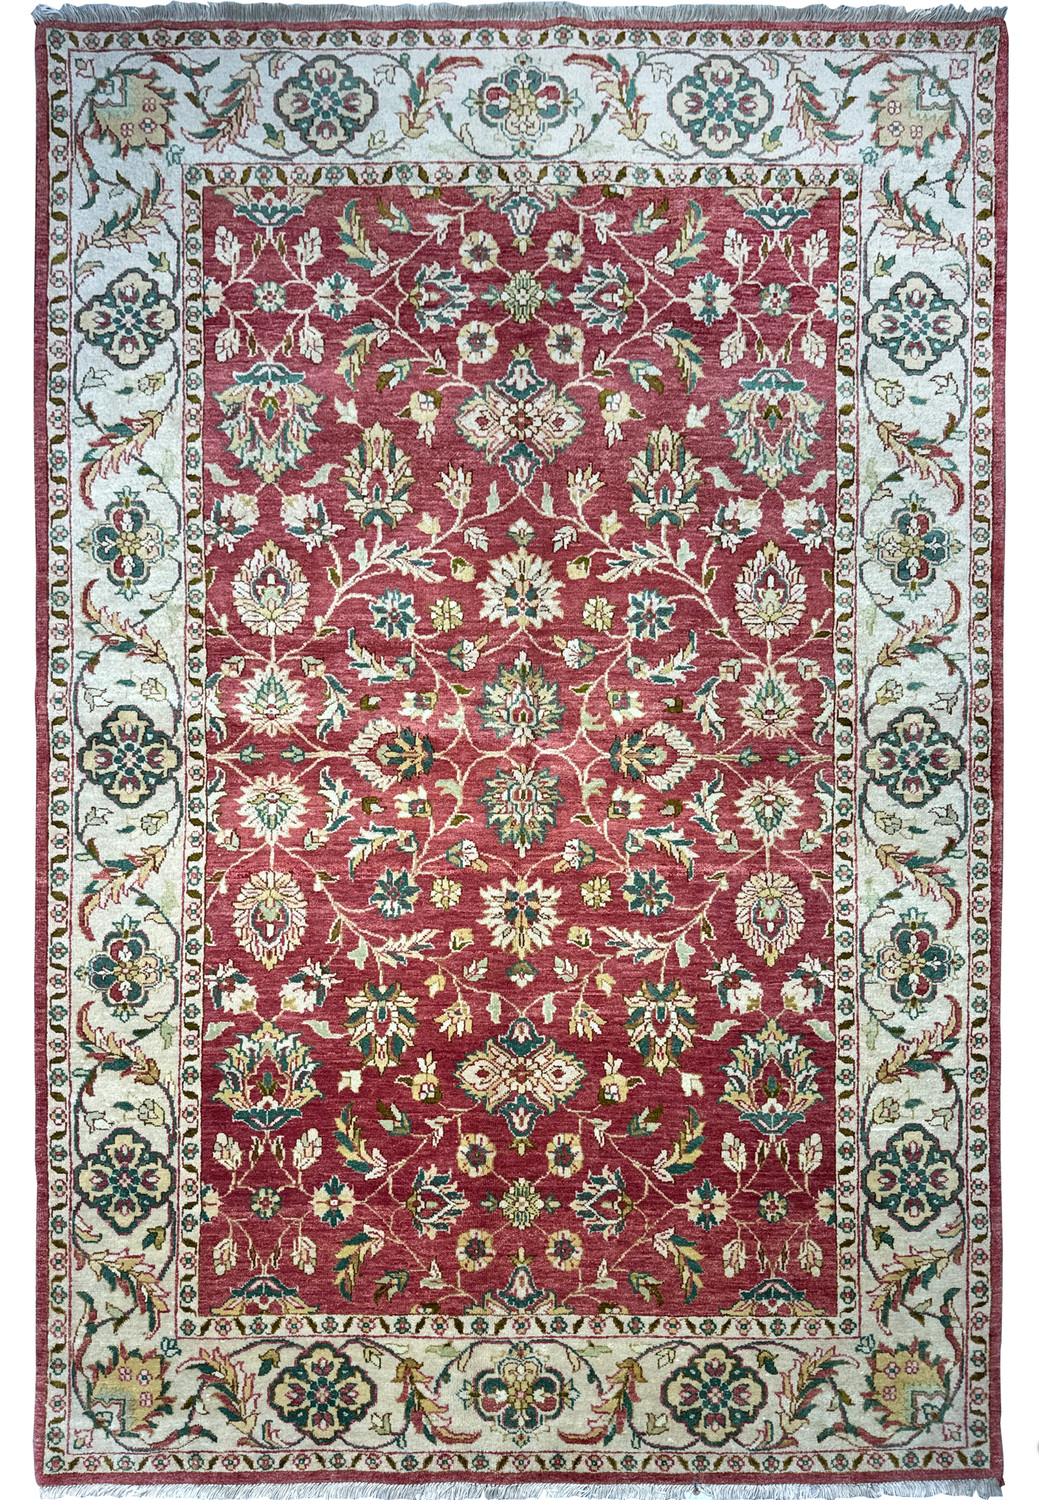 6x9 Ziegler Rug displaying intricate floral and vine patterns with a prominent burgundy field, bordered by cream and sage green accents, showcasing the exquisite detail of handmade oriental rugs